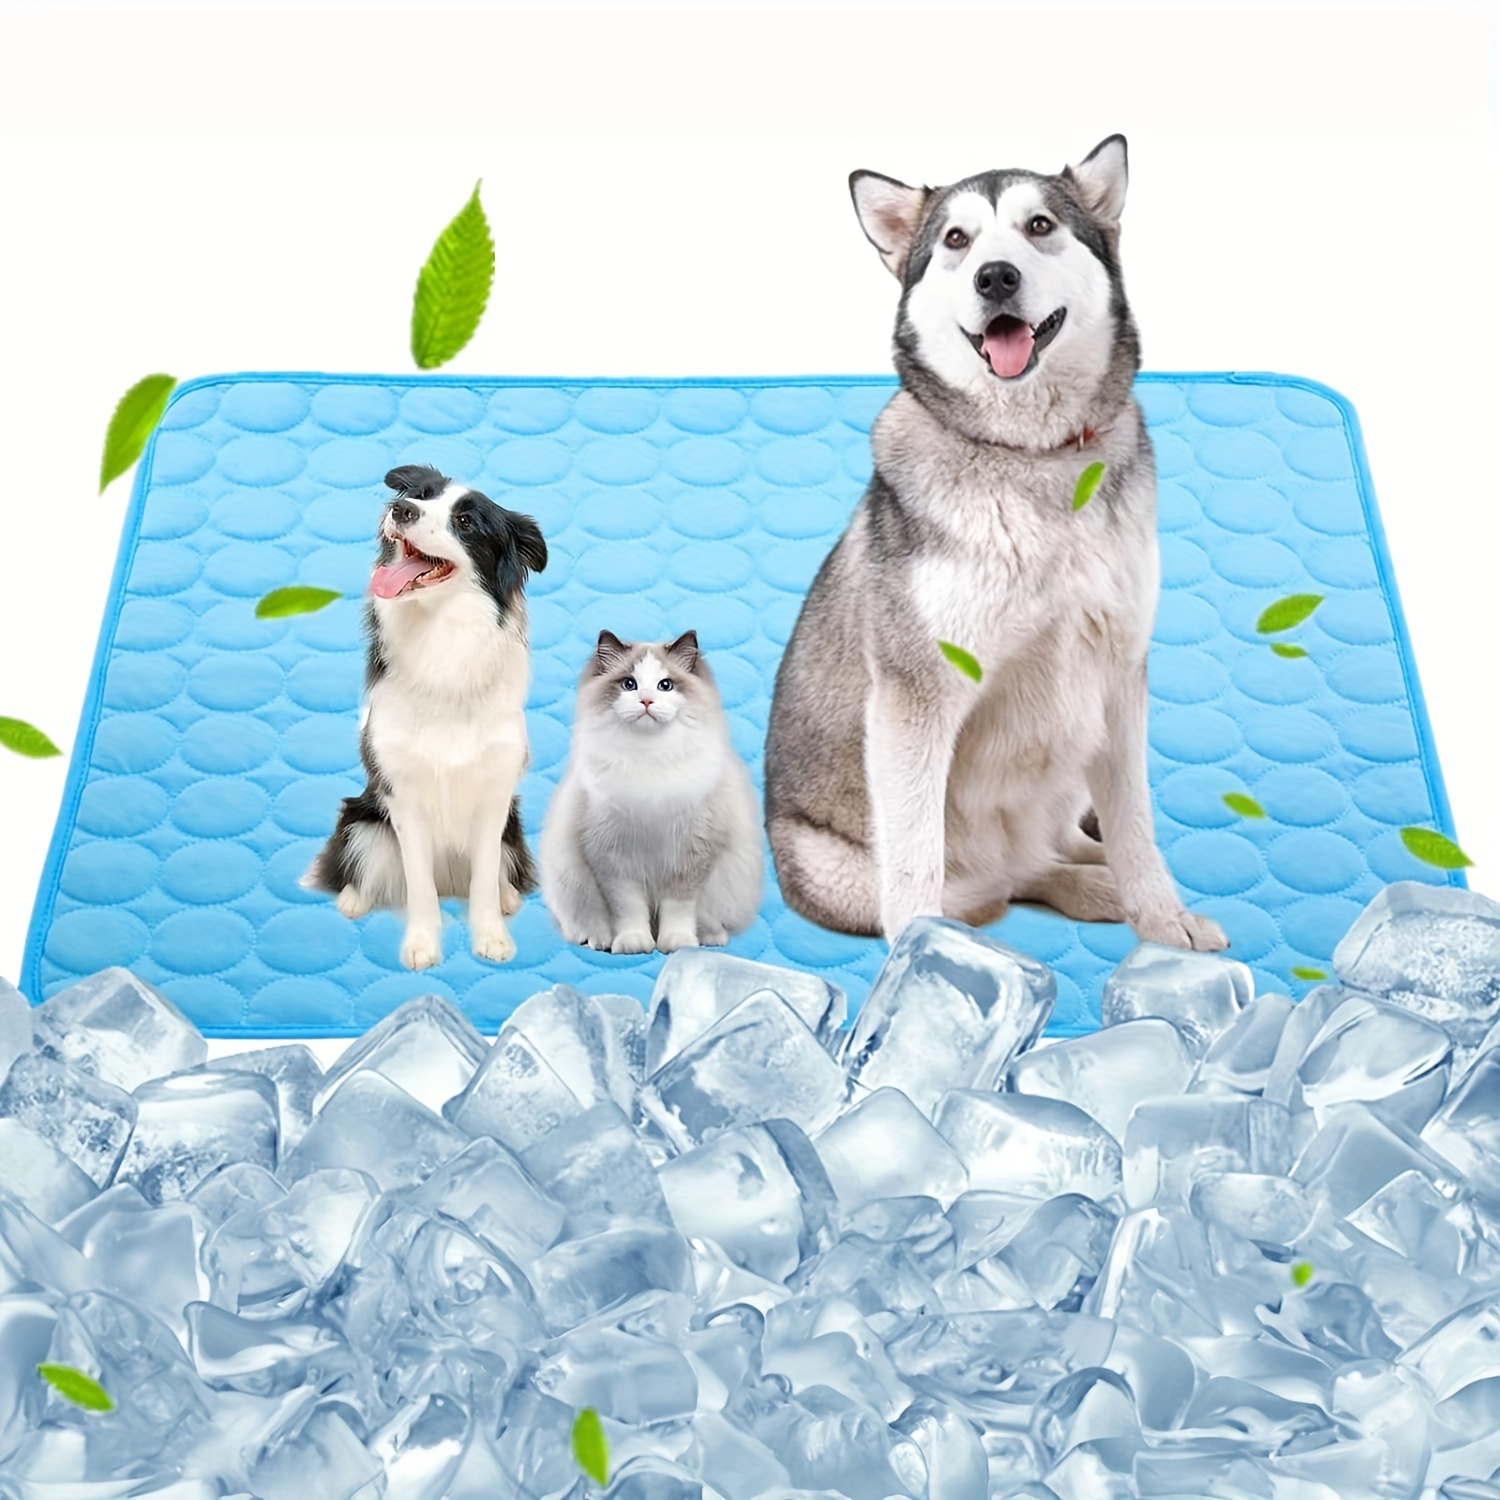 

1pc Cooling Pet Mat, Summer Dog Cooling Pad For Kennel, Crate, Car & Outdoor, Ice Silk Mat Cooling Blanket, Non-toxic, Breathable Sleep Bed For Beach, Available For Dogs & Cats